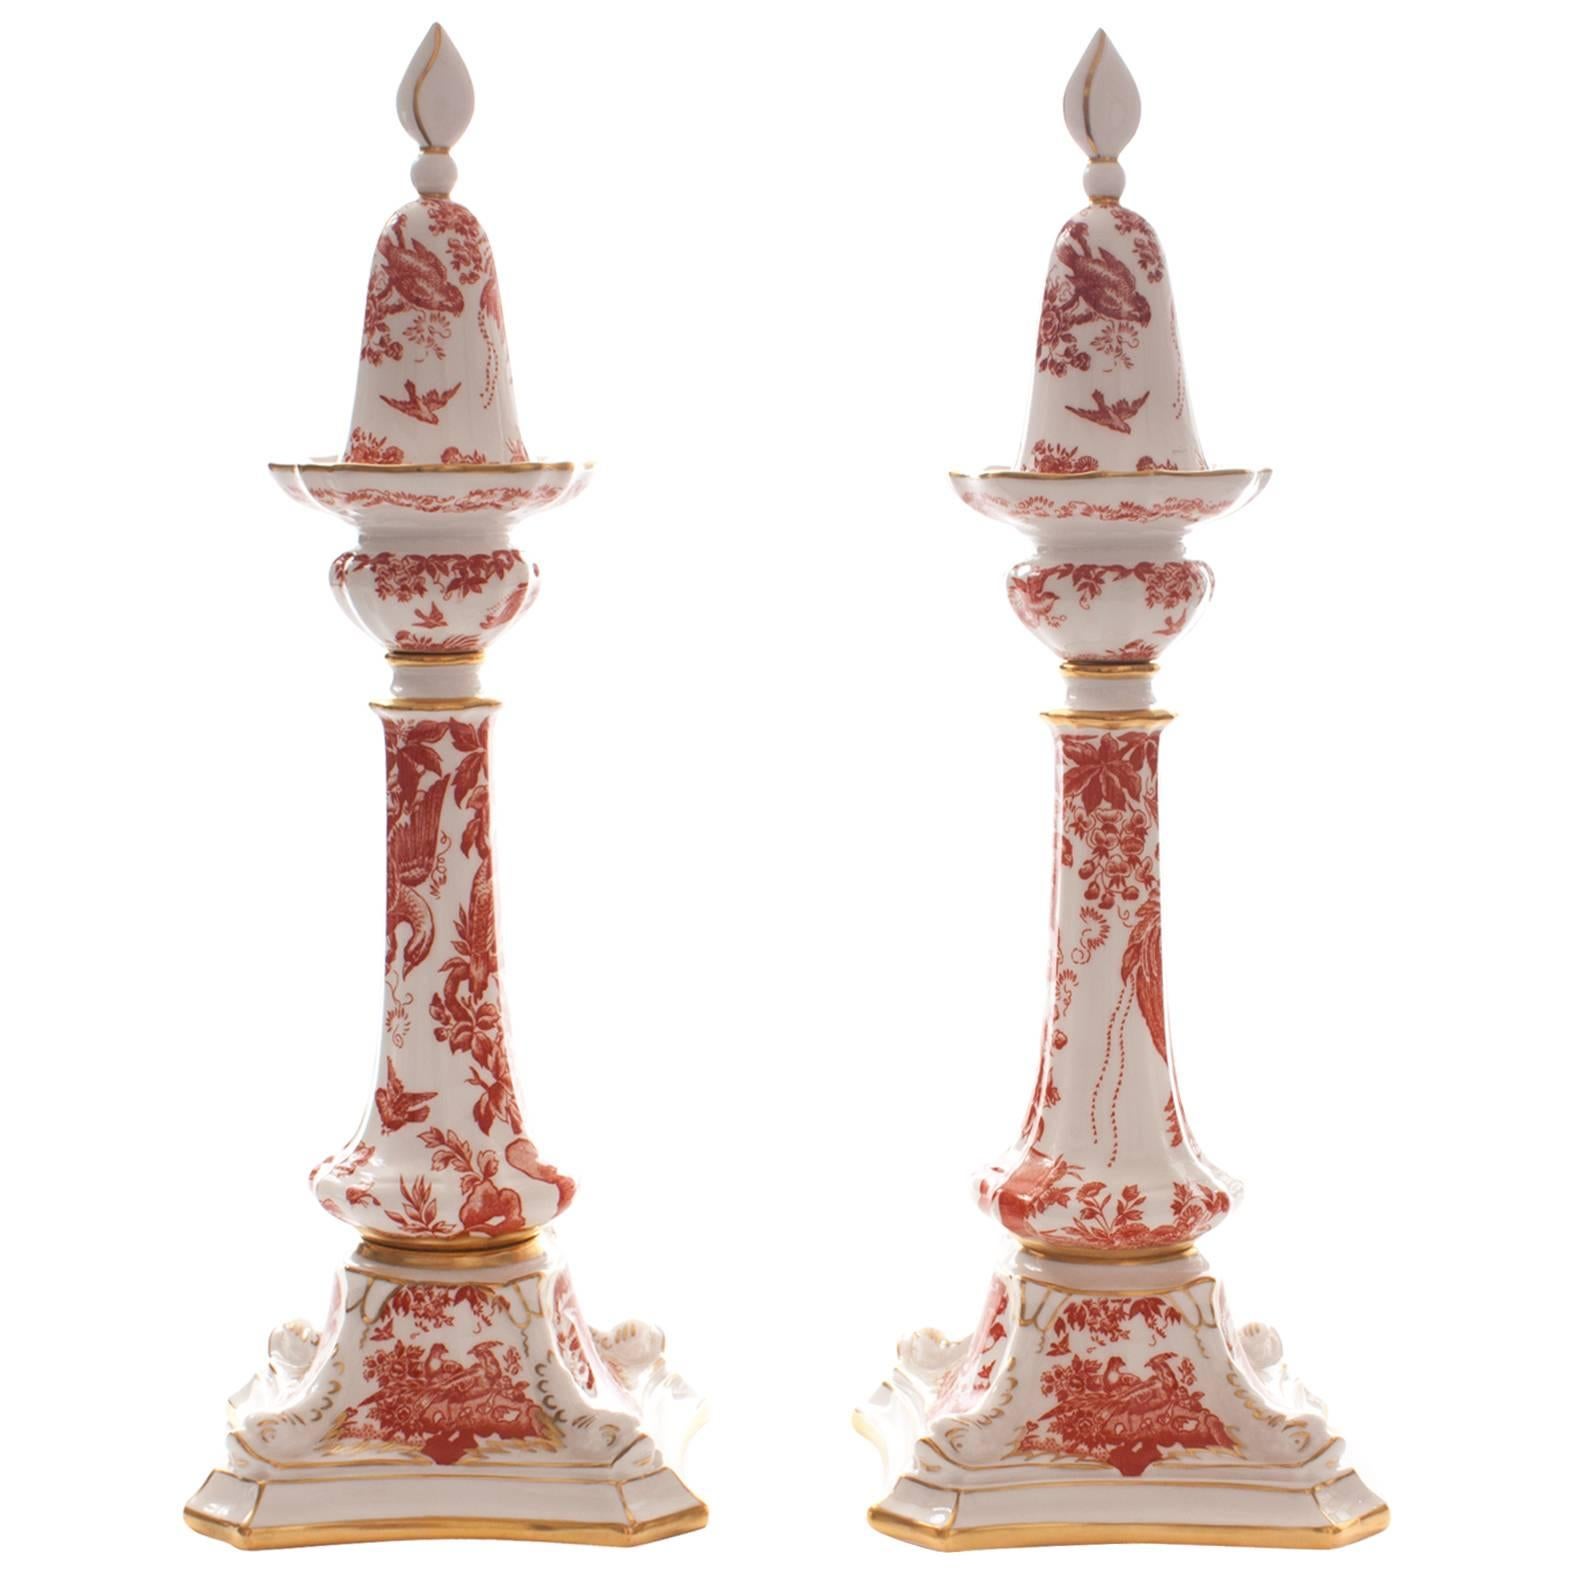 Pair of Royal Crown Derby Candlesticks and Snuffers, "Red Aves" Dolphin Figural